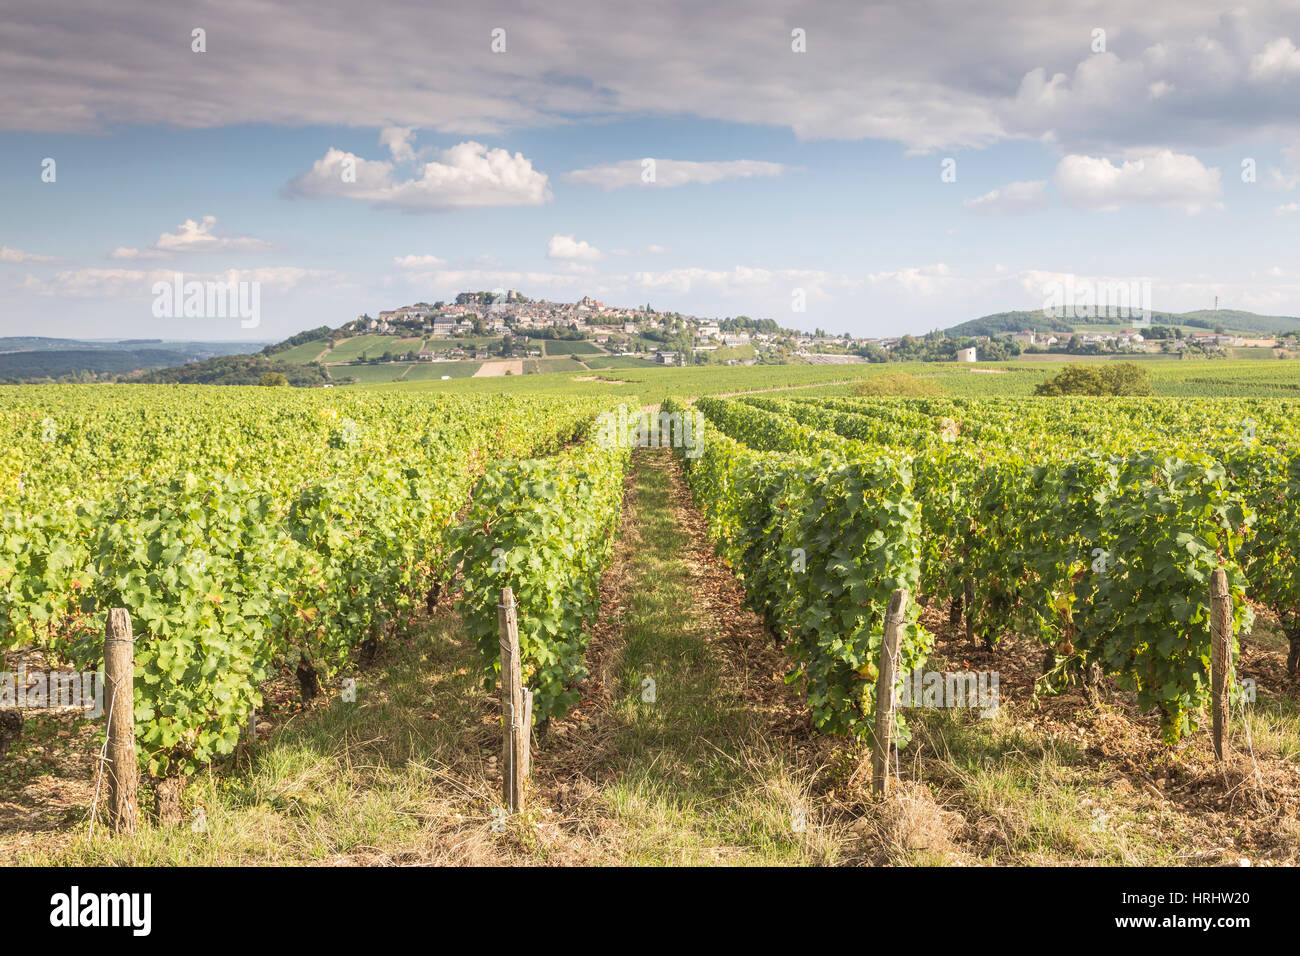 The vineyards of Sancerre, France. Known for its fine wines from grape varities such as pinot noir and sauvignon blanc, the vine Stock Photo